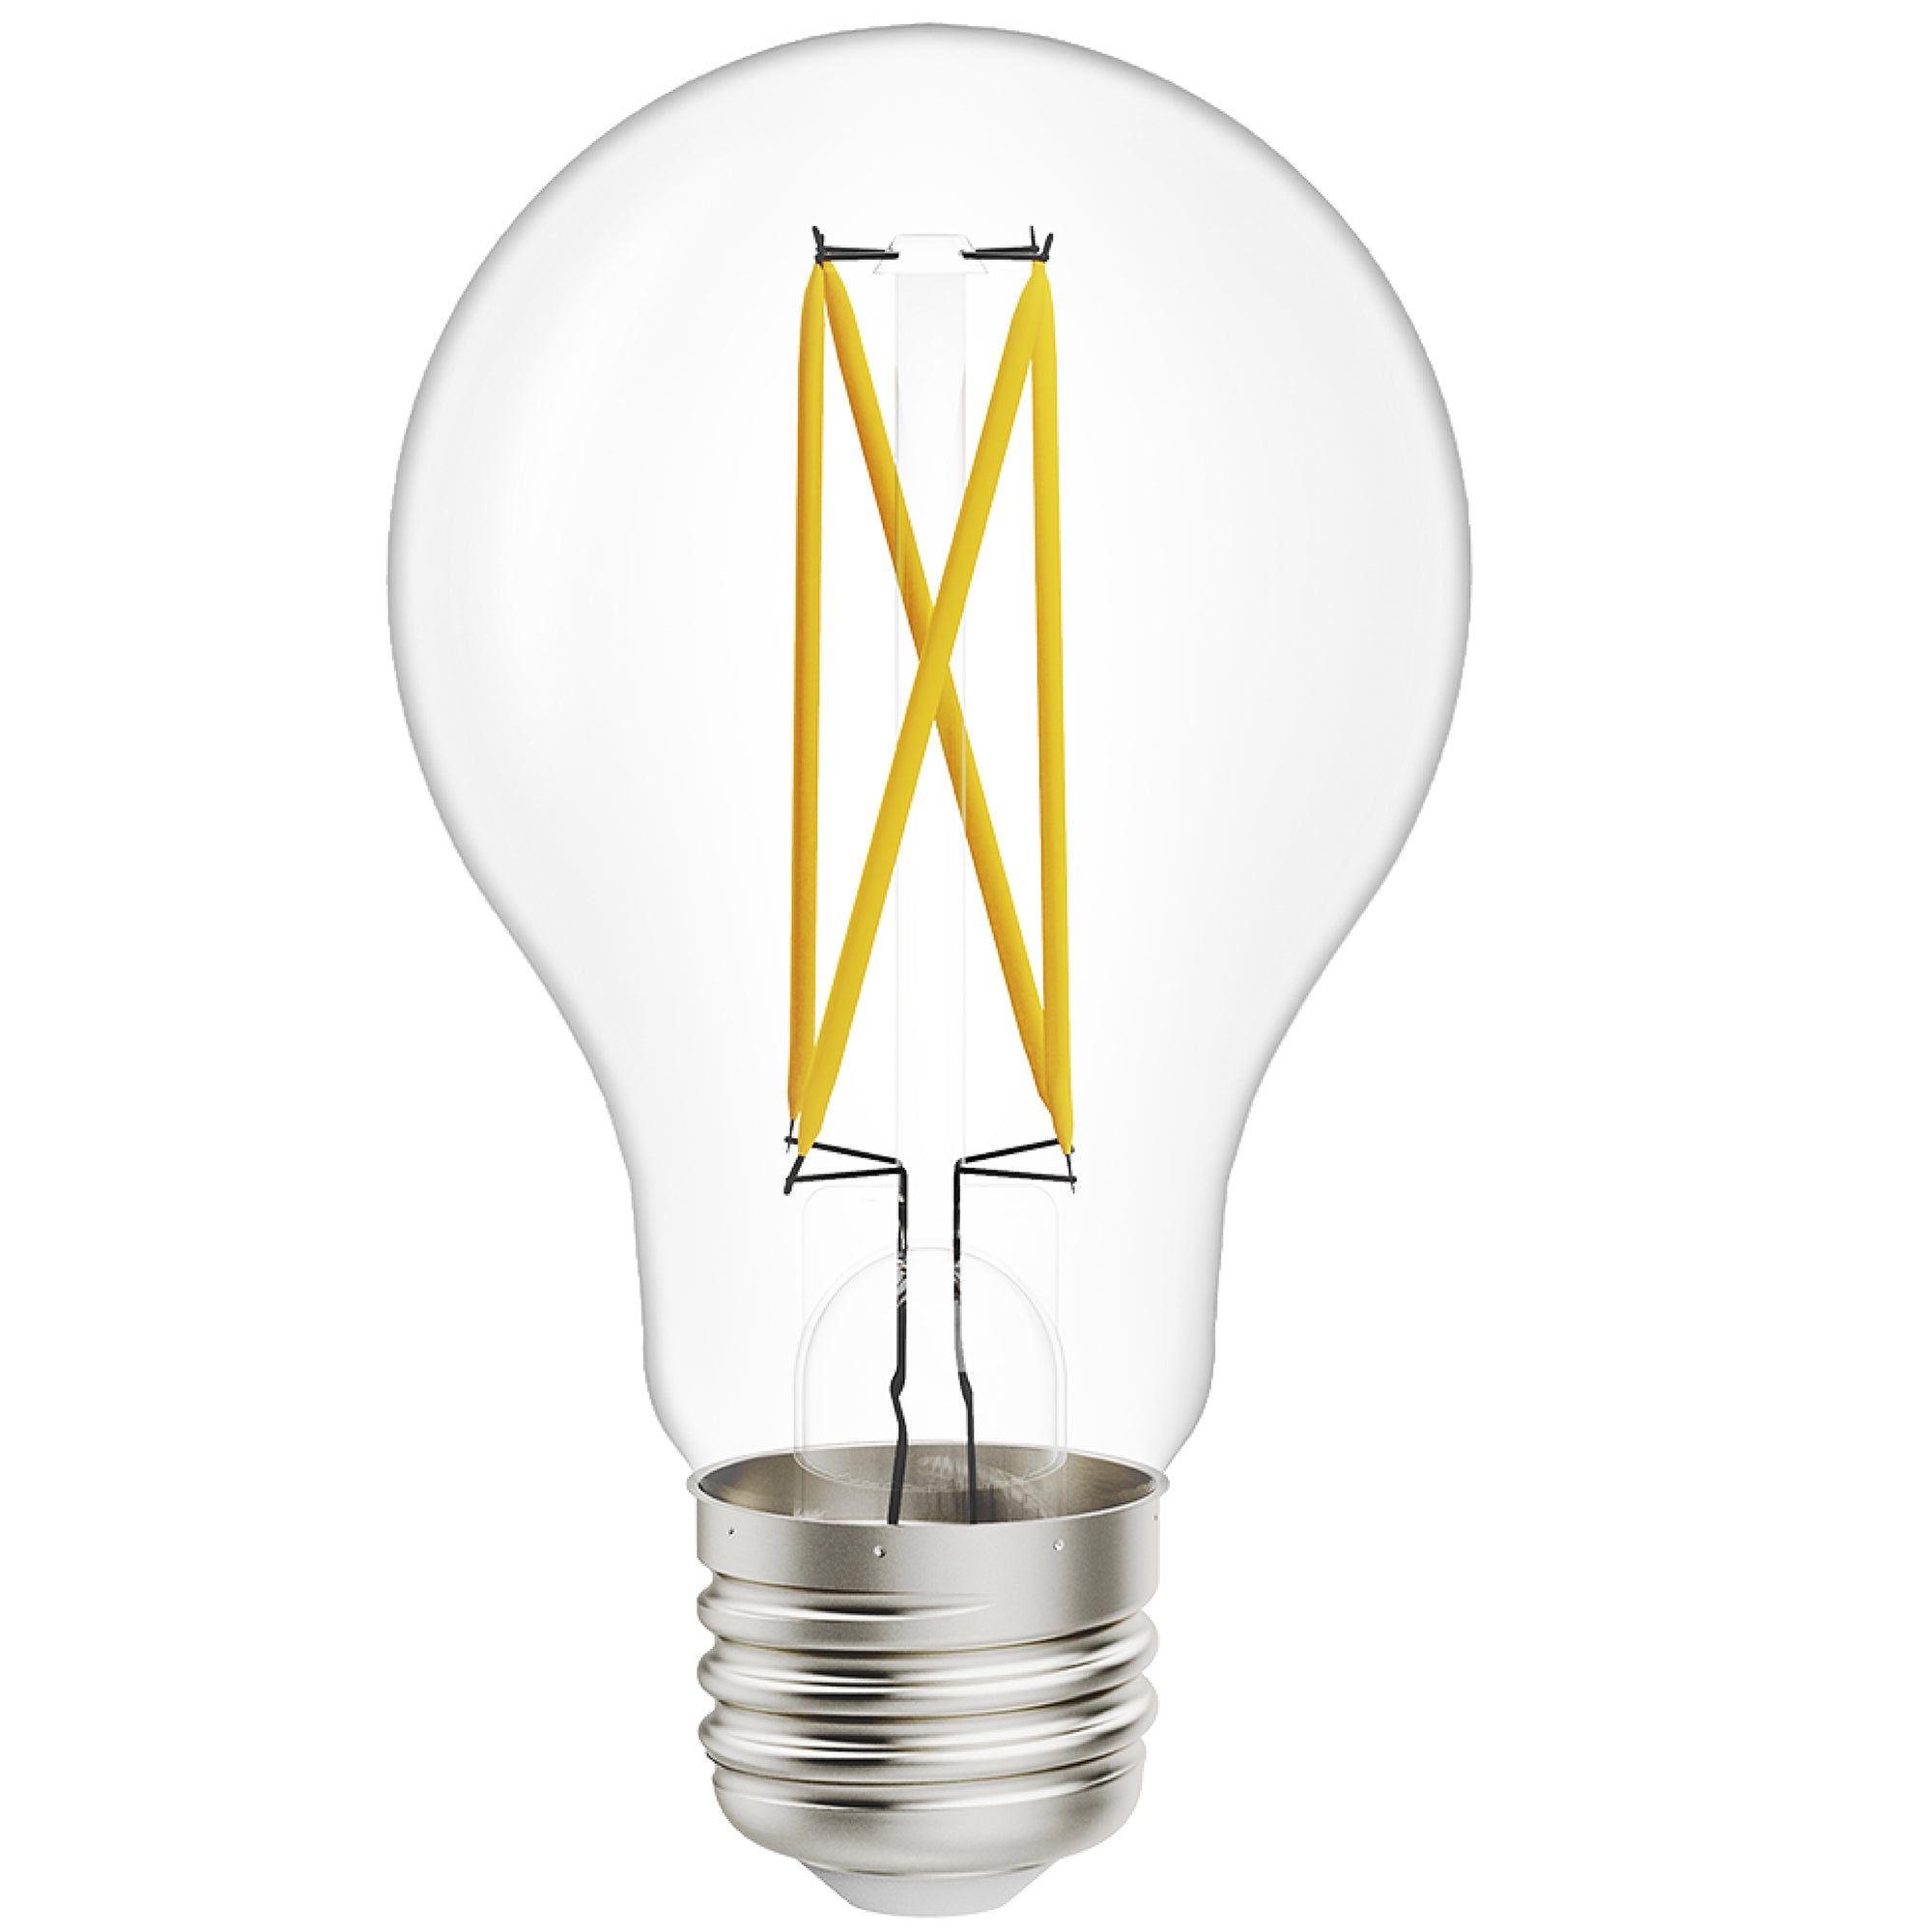 The Sunco A19 LED Filament Bulb with Dusk to Dawn features the retro look of a glass Edison style bulb with high tech inside. Our glass light bulb includes the familiar filament, but with LED technology on what people refer to as the filament coils.